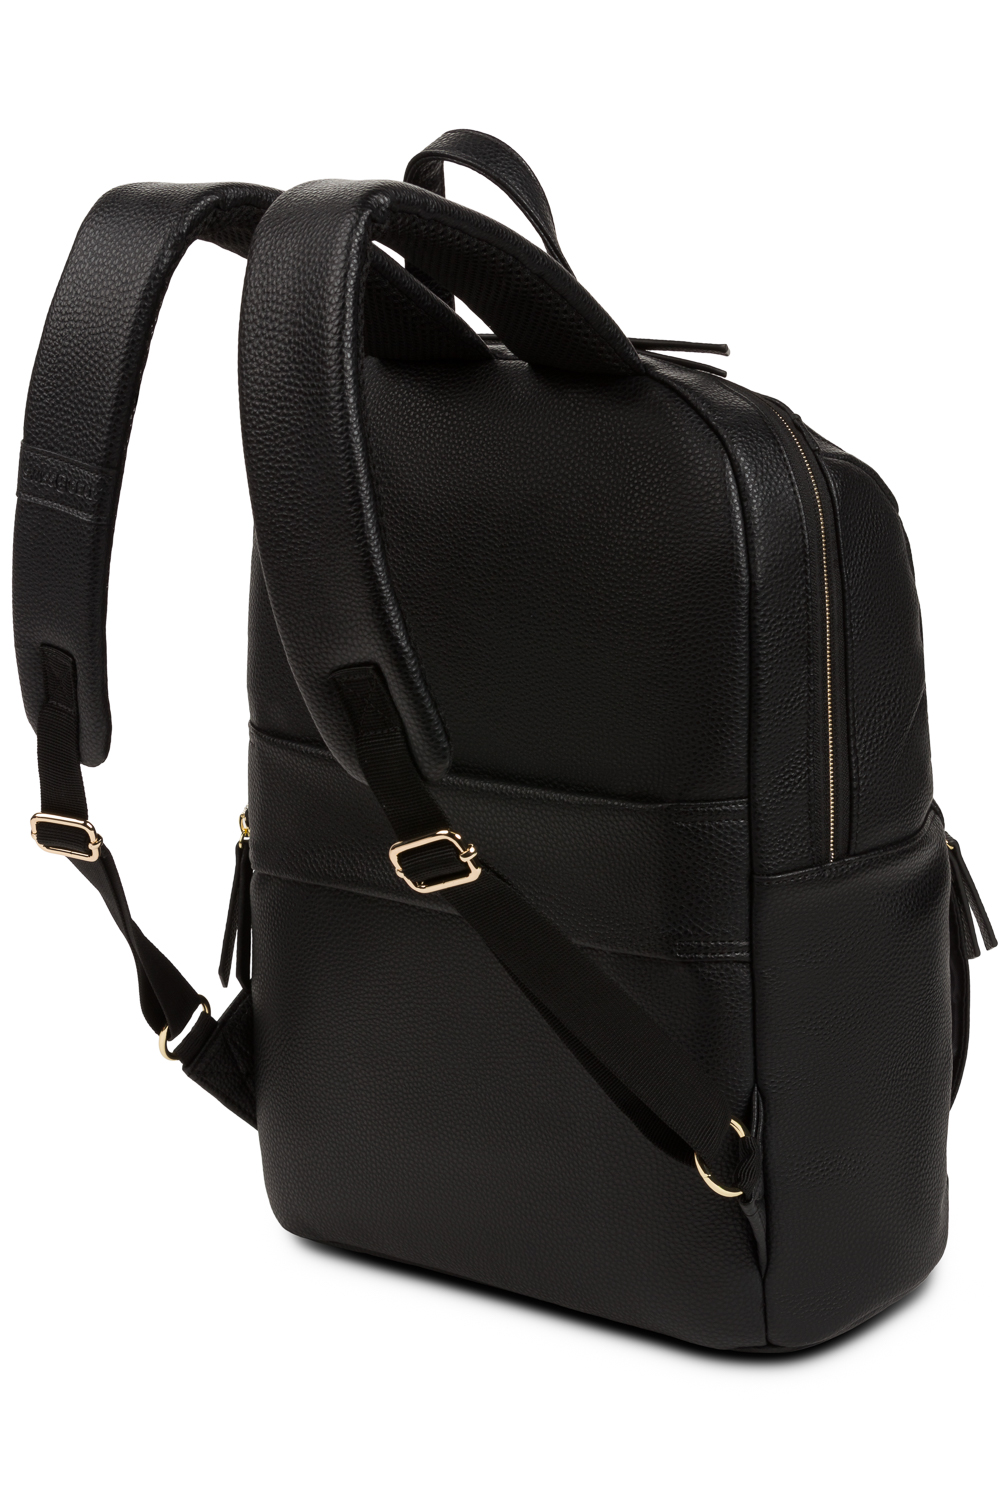 Buy CrossBody and Laptop Bags for Women - The Messy Corner